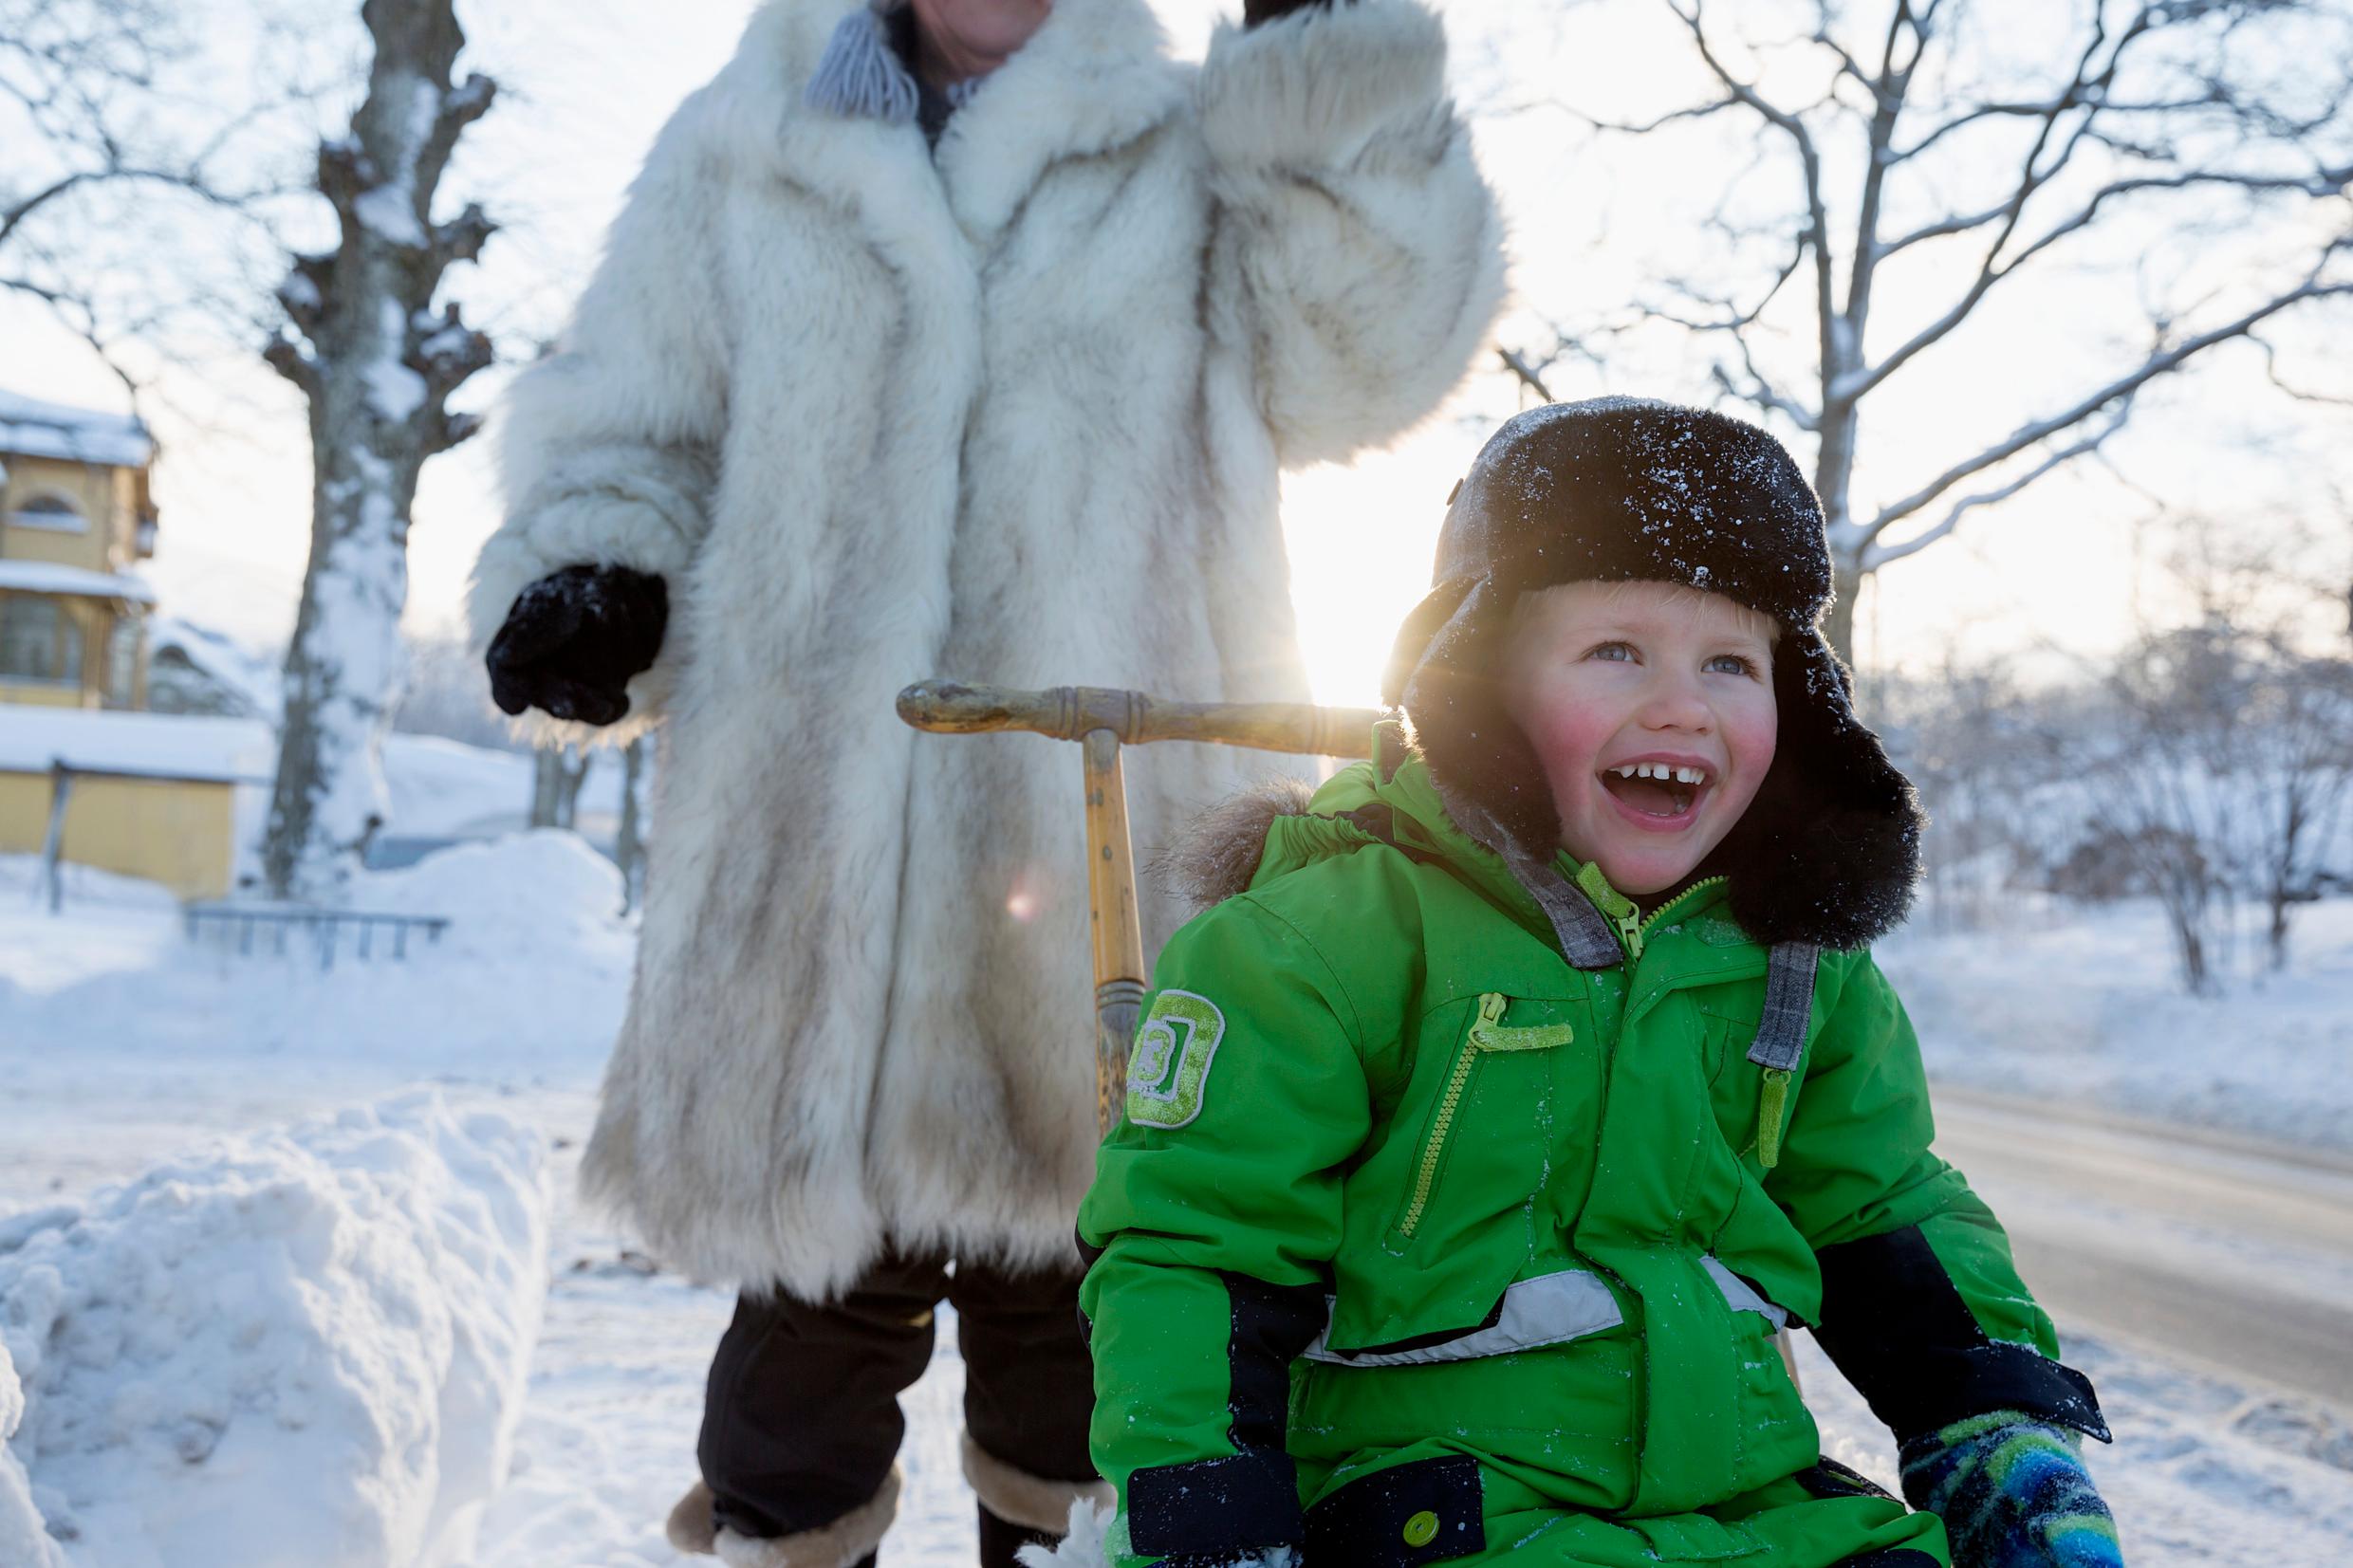 A boy in a green overall and a furry hat on a sledge in the snow. A woman in a fur coat behind him.